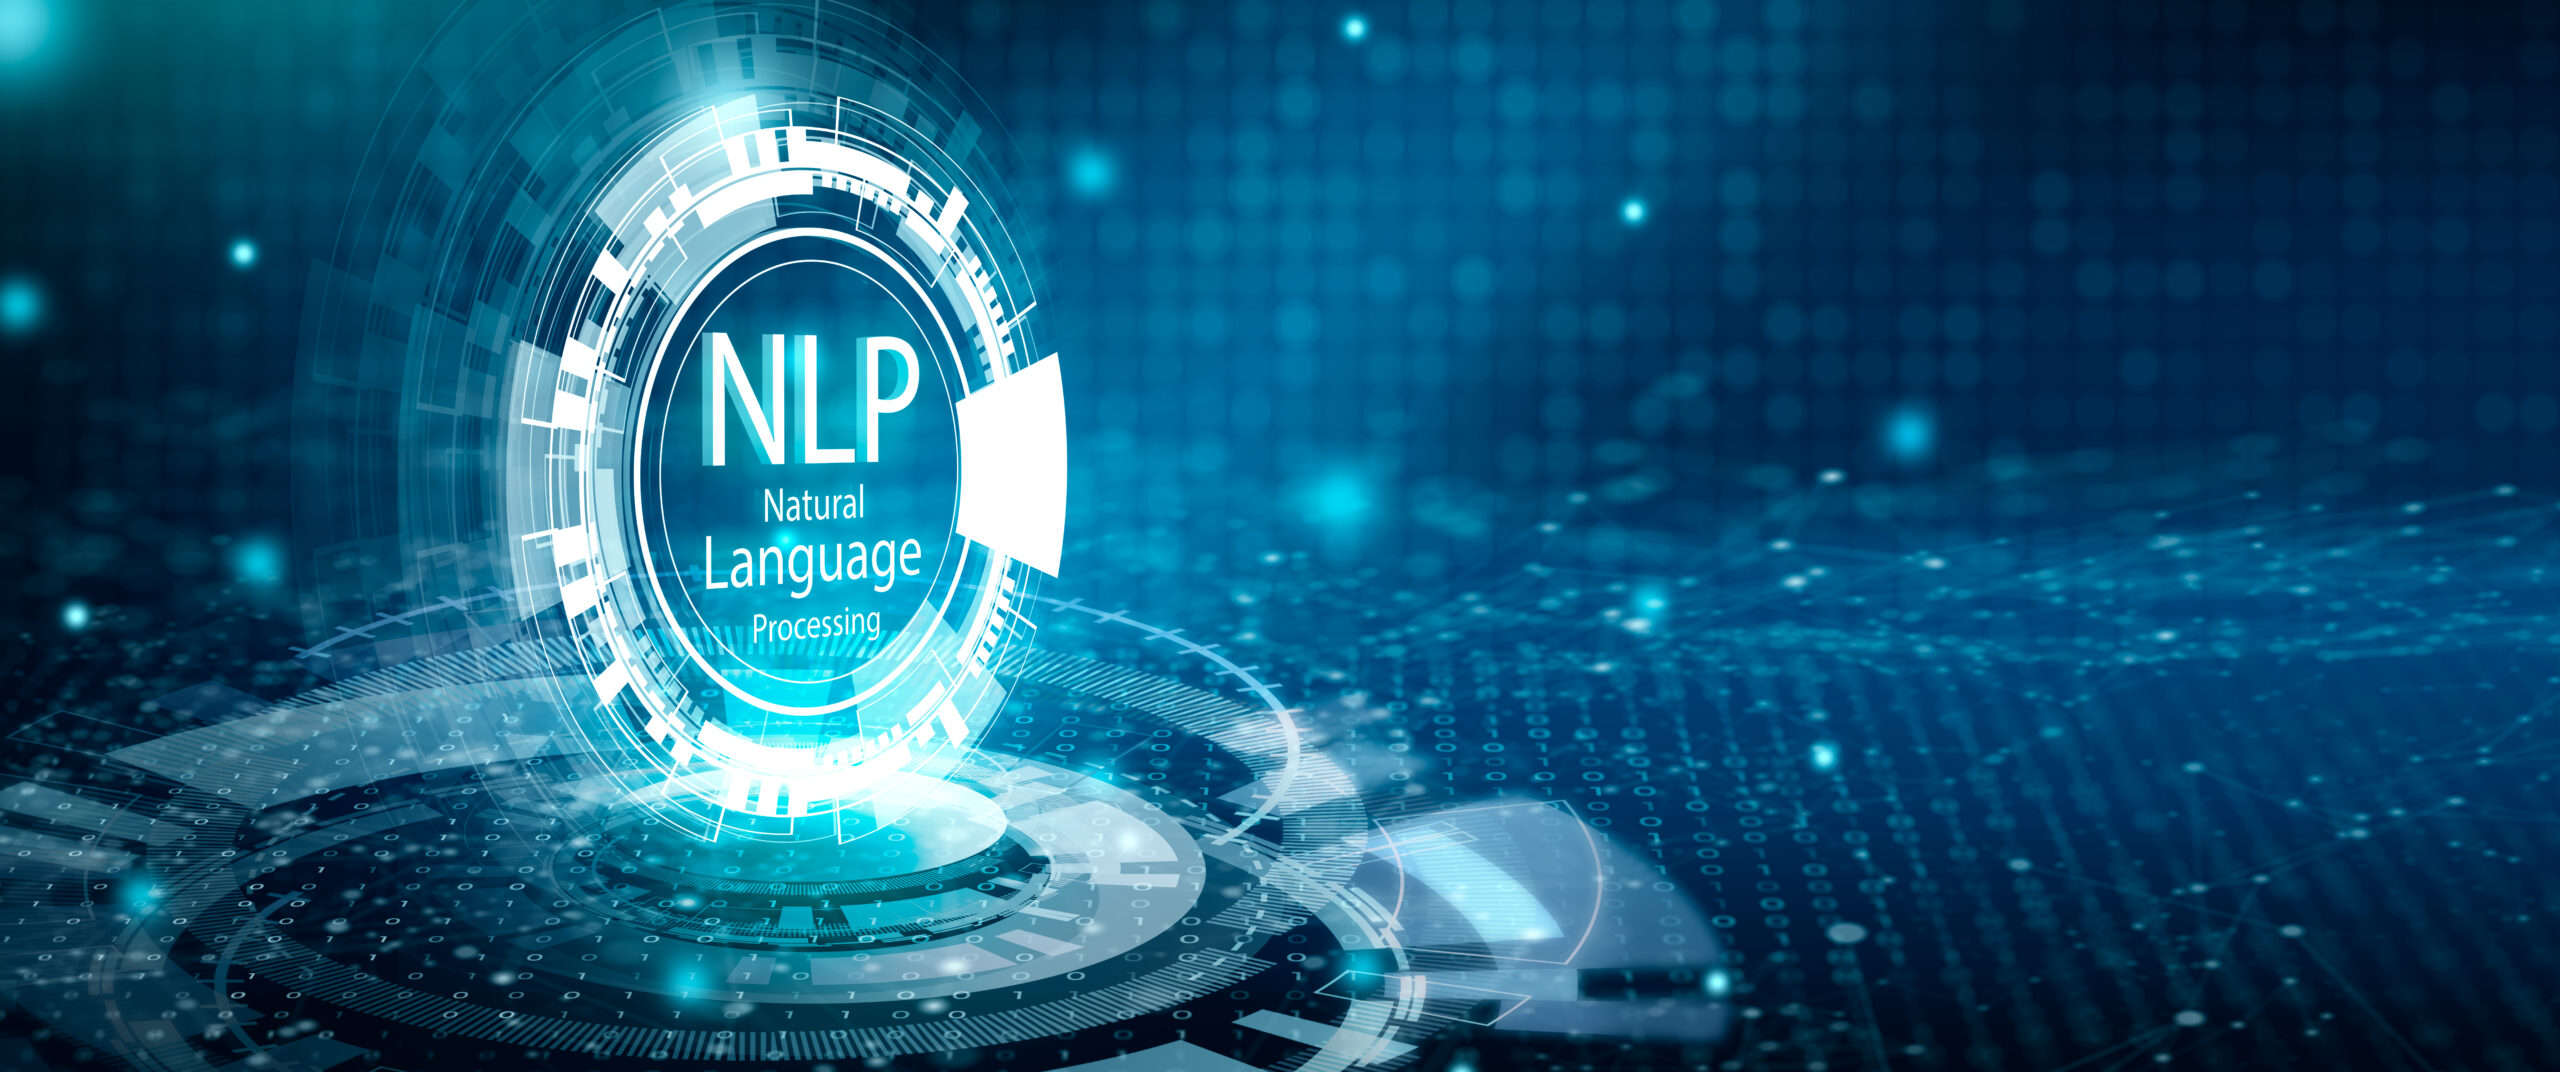 NLP Natural Language Processing cognitive computing technology